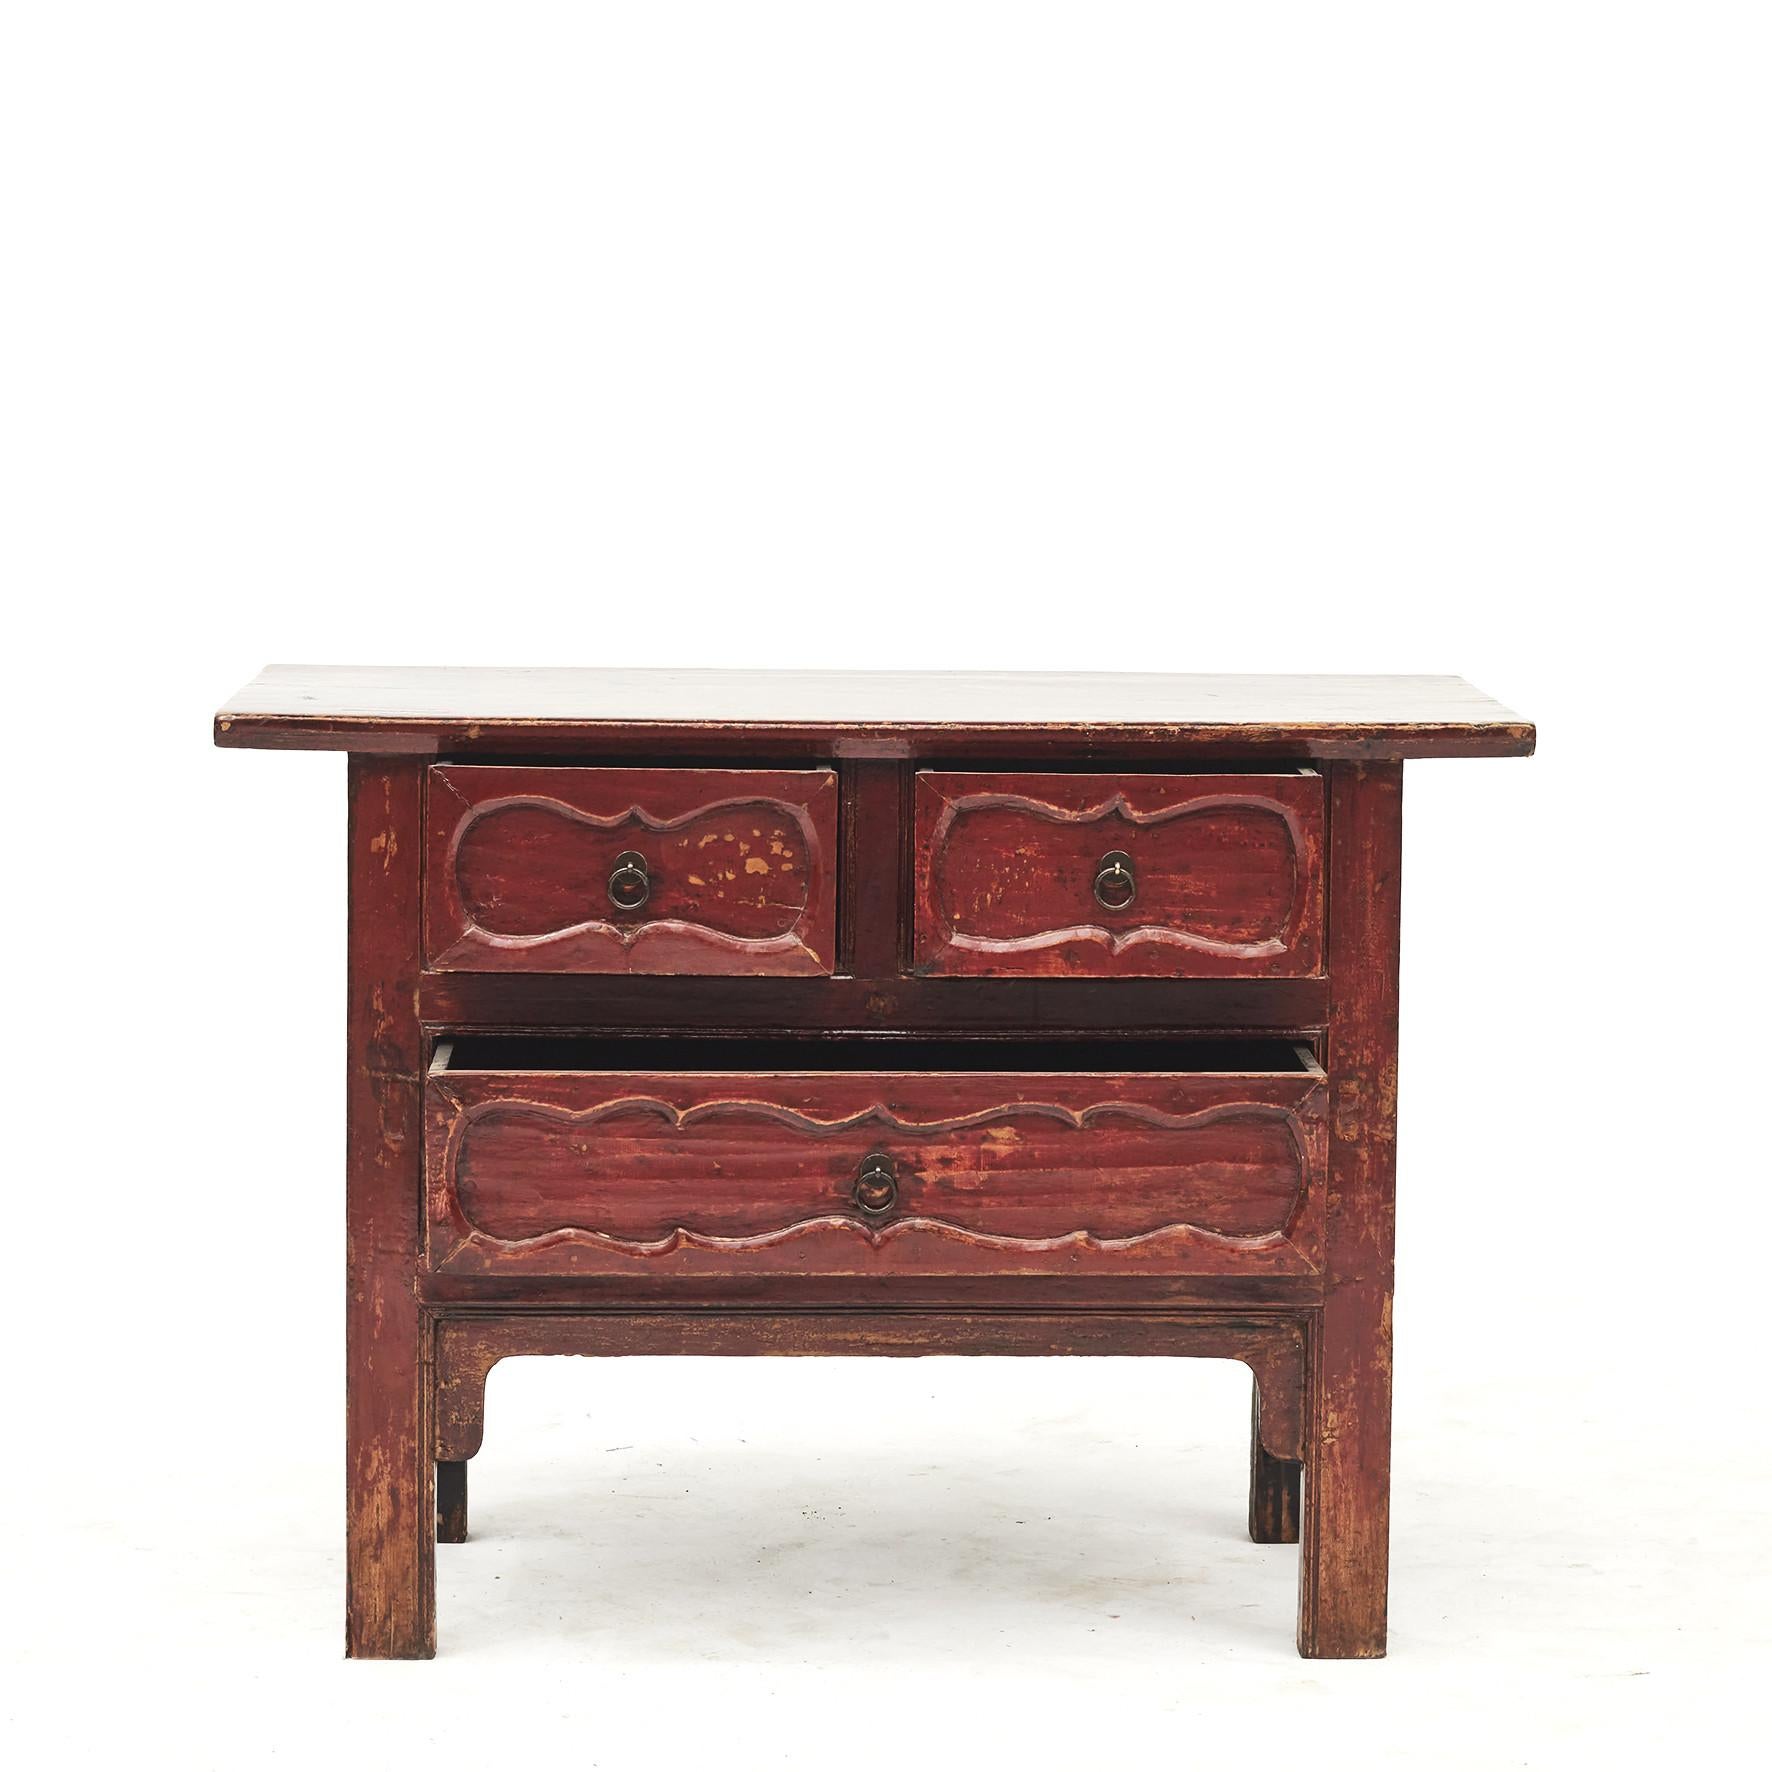 Mid-19th century chest of drawers or sideboard. Three drawers with carved details.
Original red lacquer and black lacquer on the sides, with a light clear surface finish, which highlights beautifully aged patina.
Shanxi, China, circa 1840.